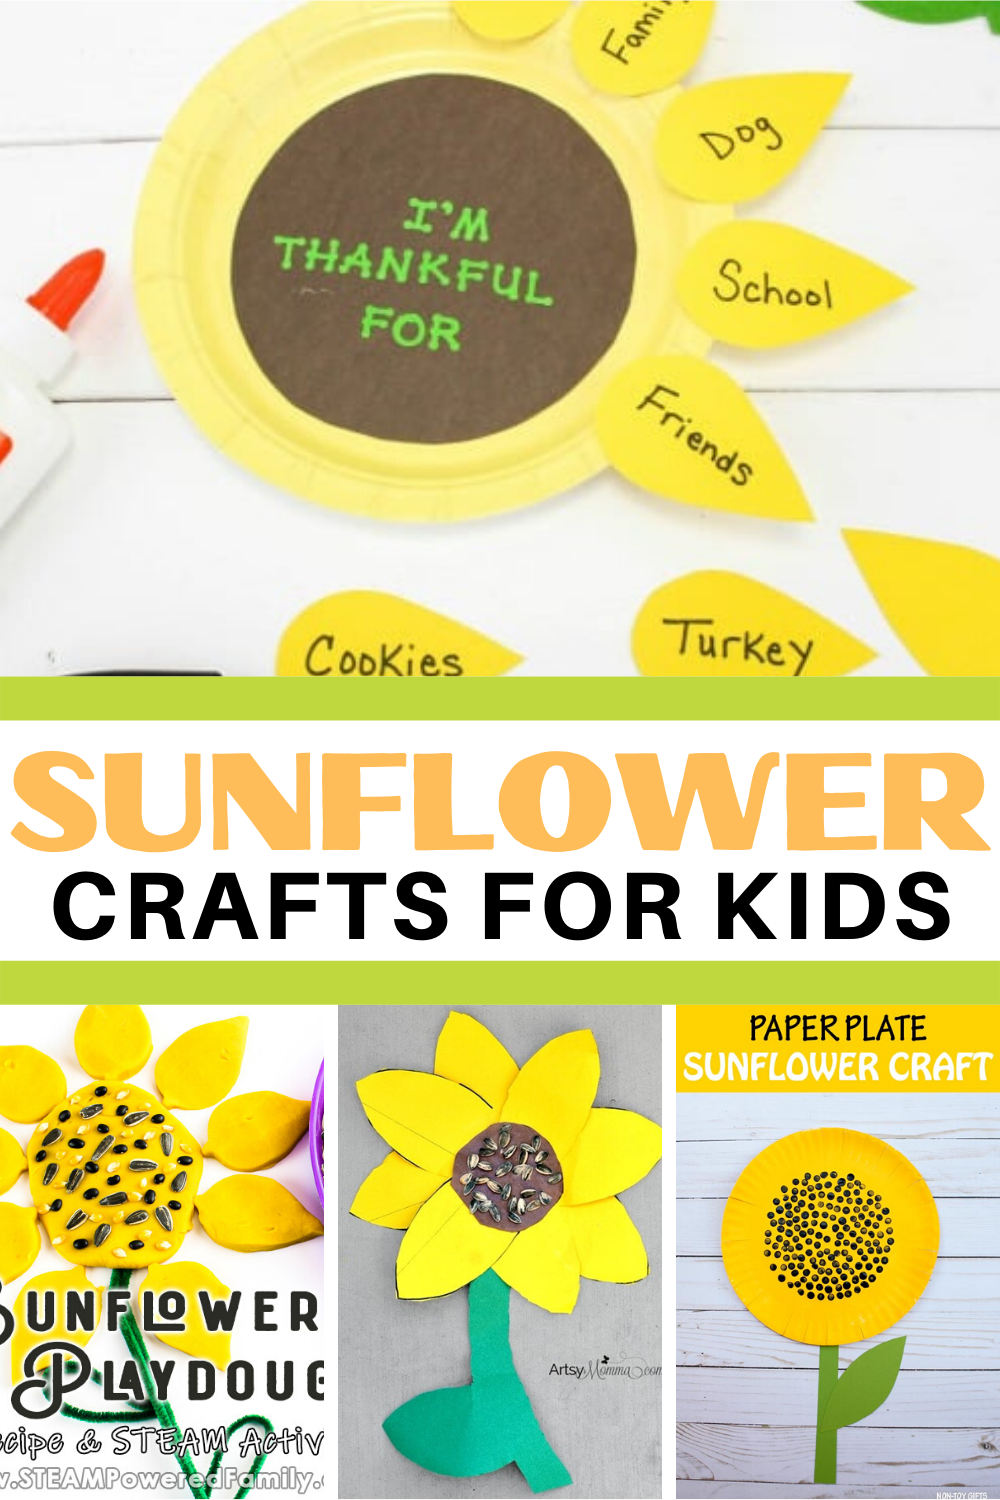 Add one or more of these preschool sunflower crafts to your summer crafting sessions. Kids will have a hard time picking a favorite.